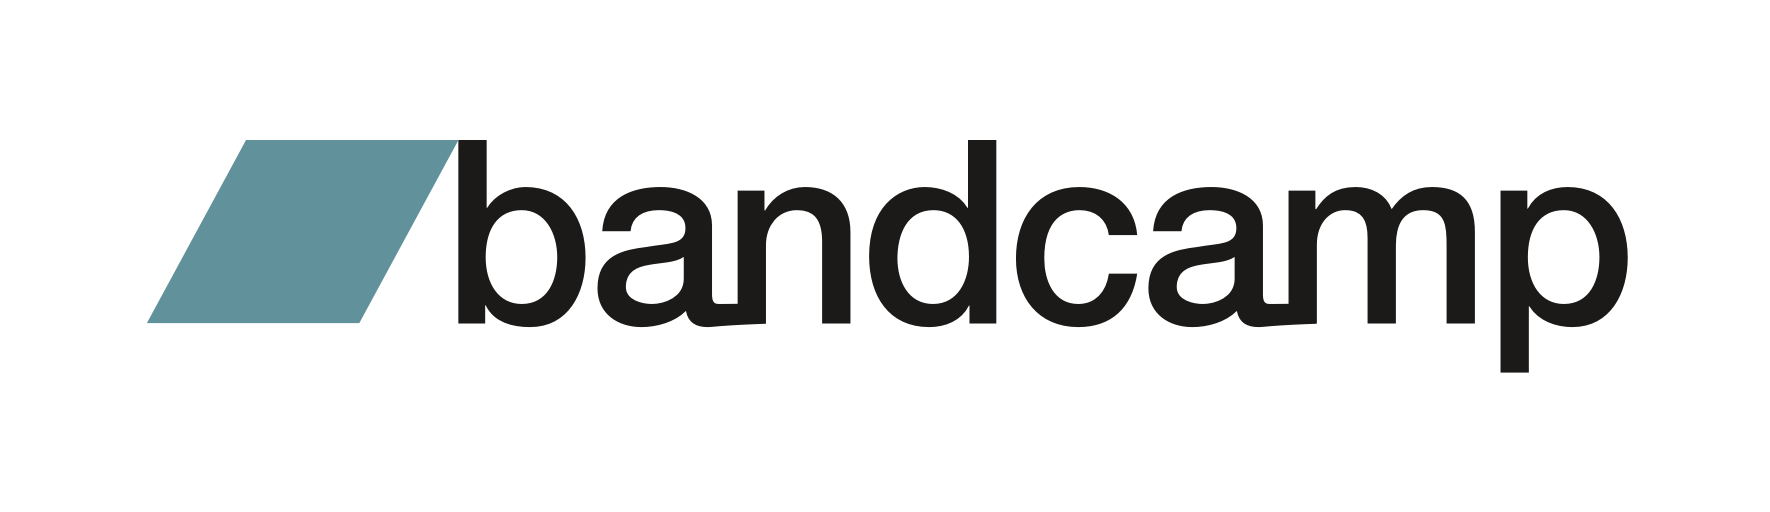 bandcamp-logotype-color-512.png